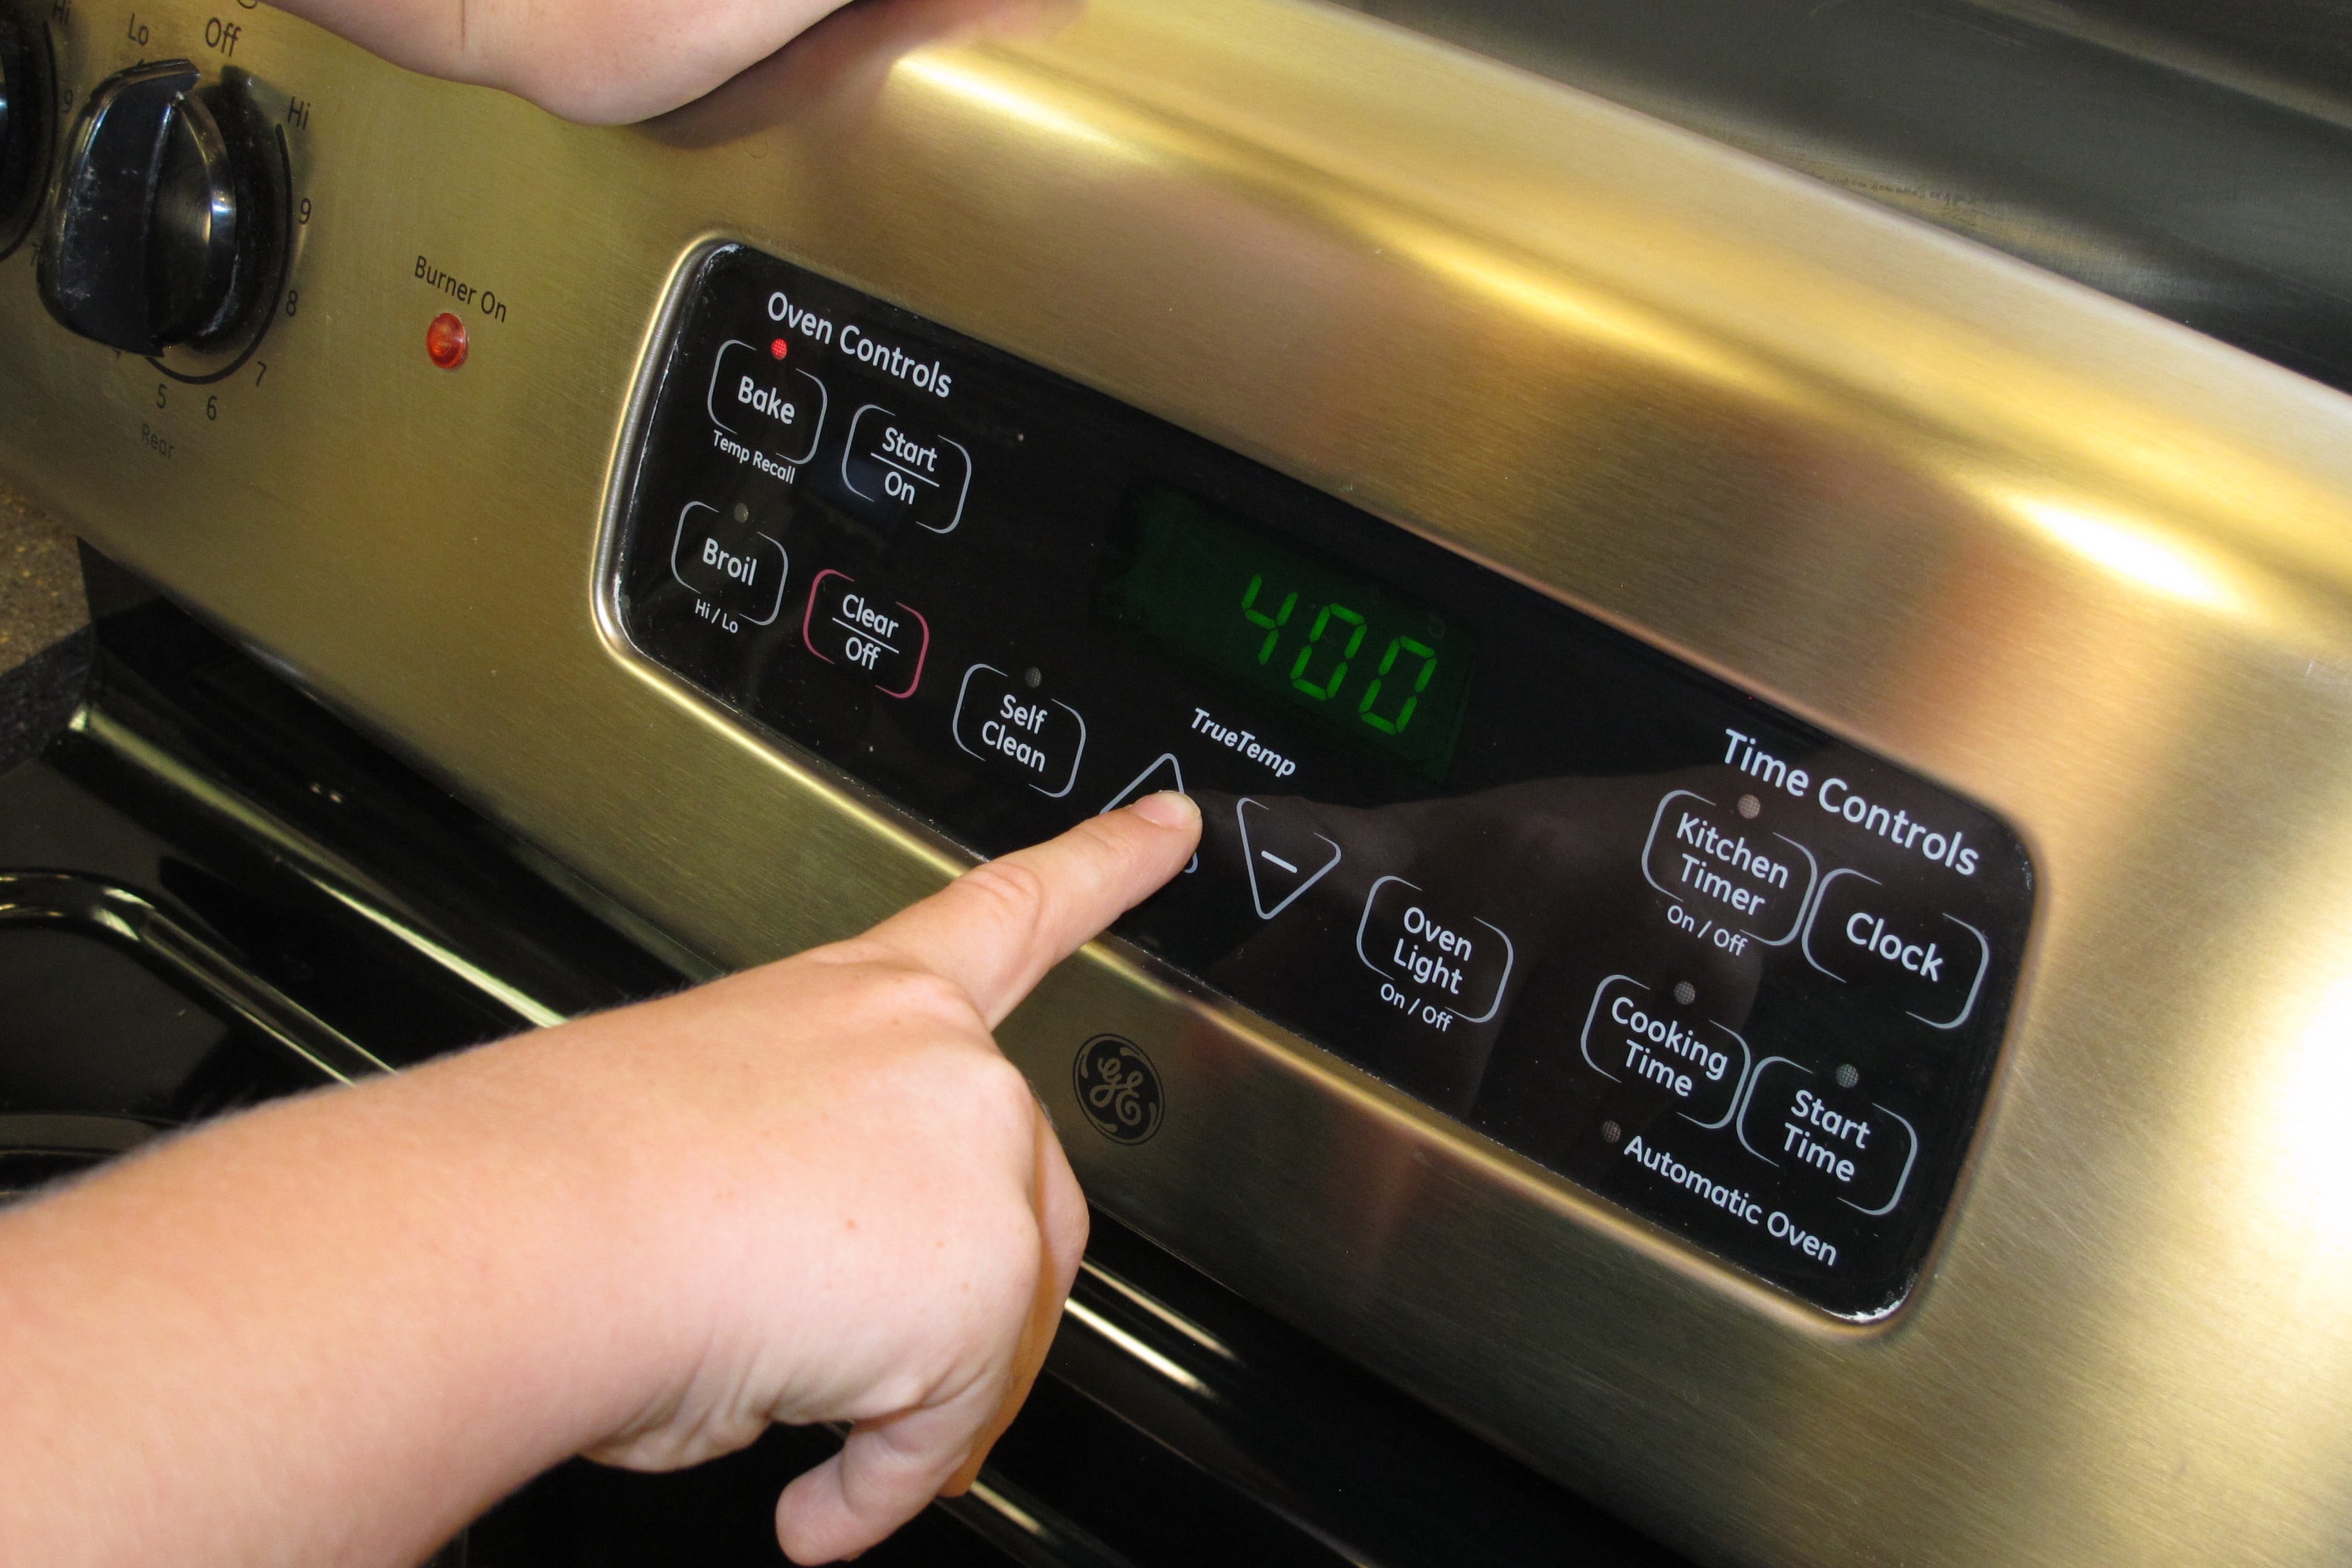 Preheat the oven to 400°F.